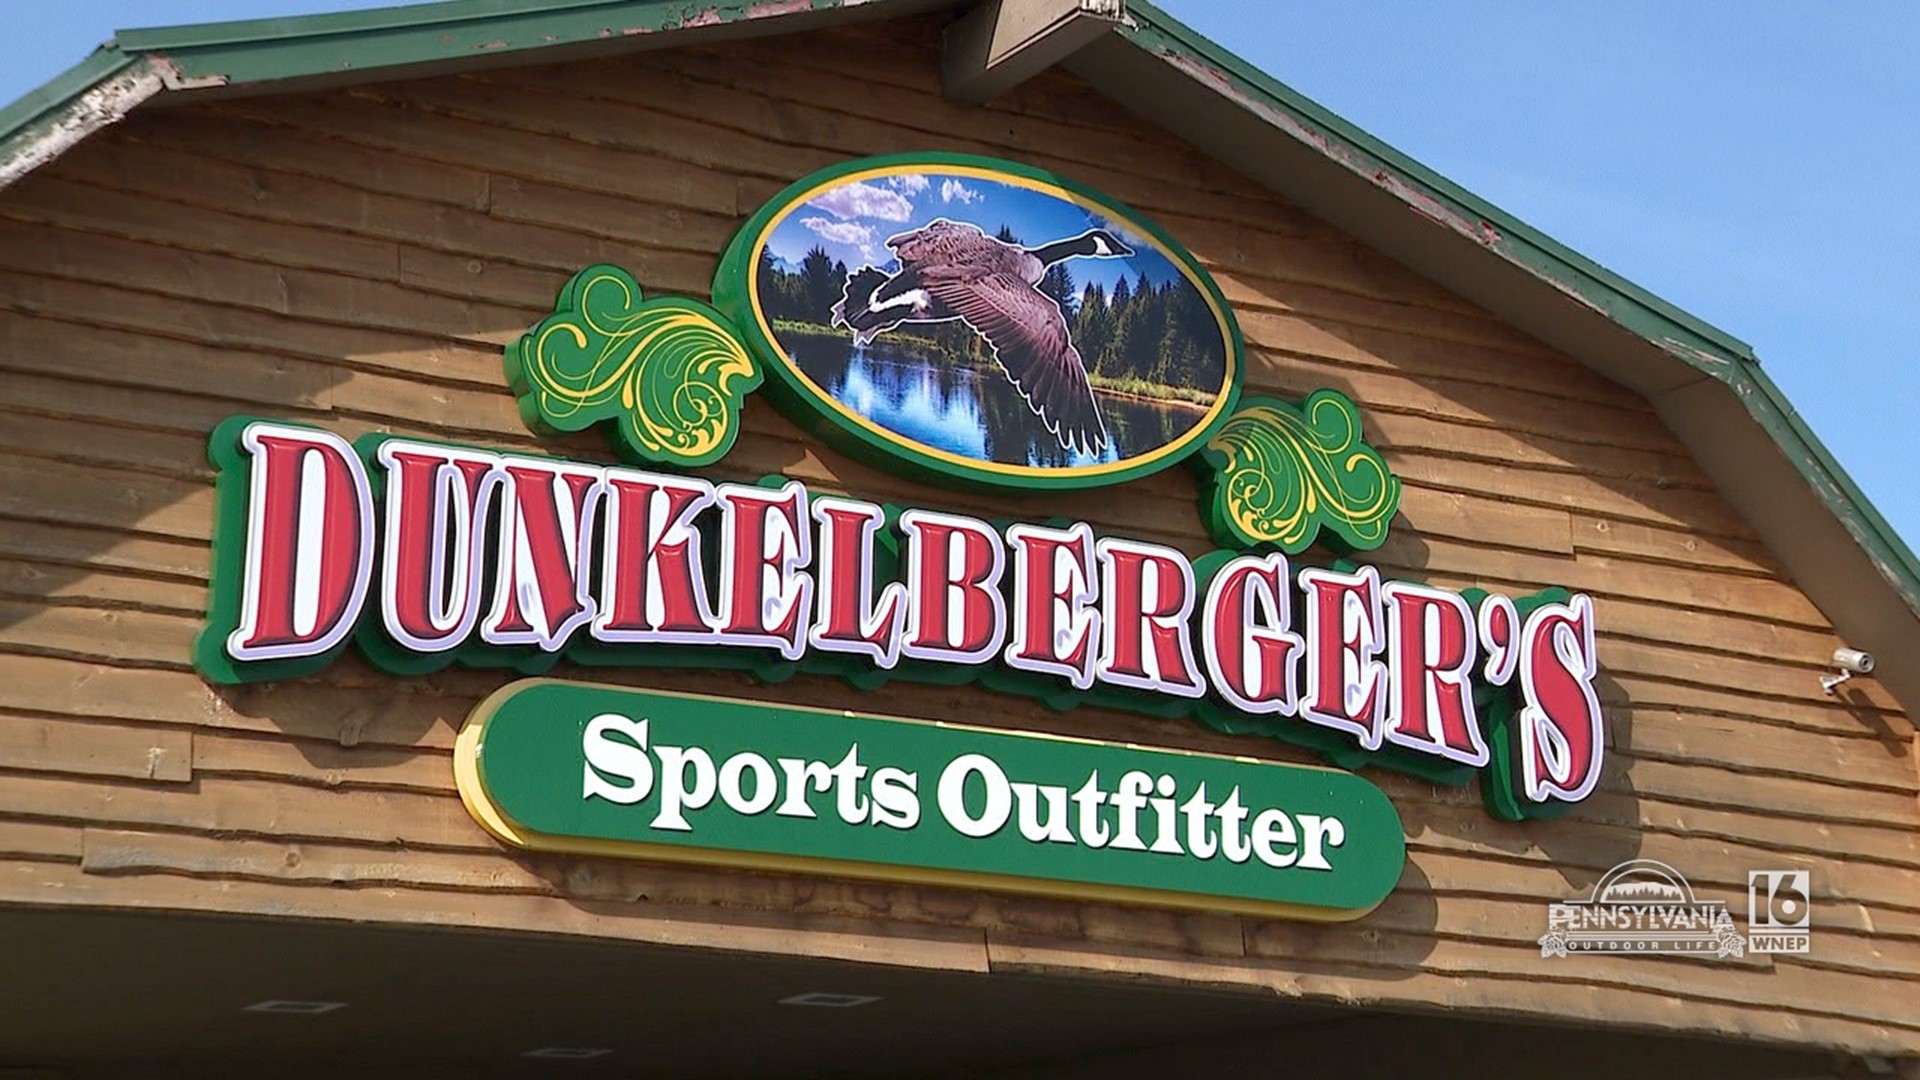 Dunkelberger's has it all when it comes to trout fishing.